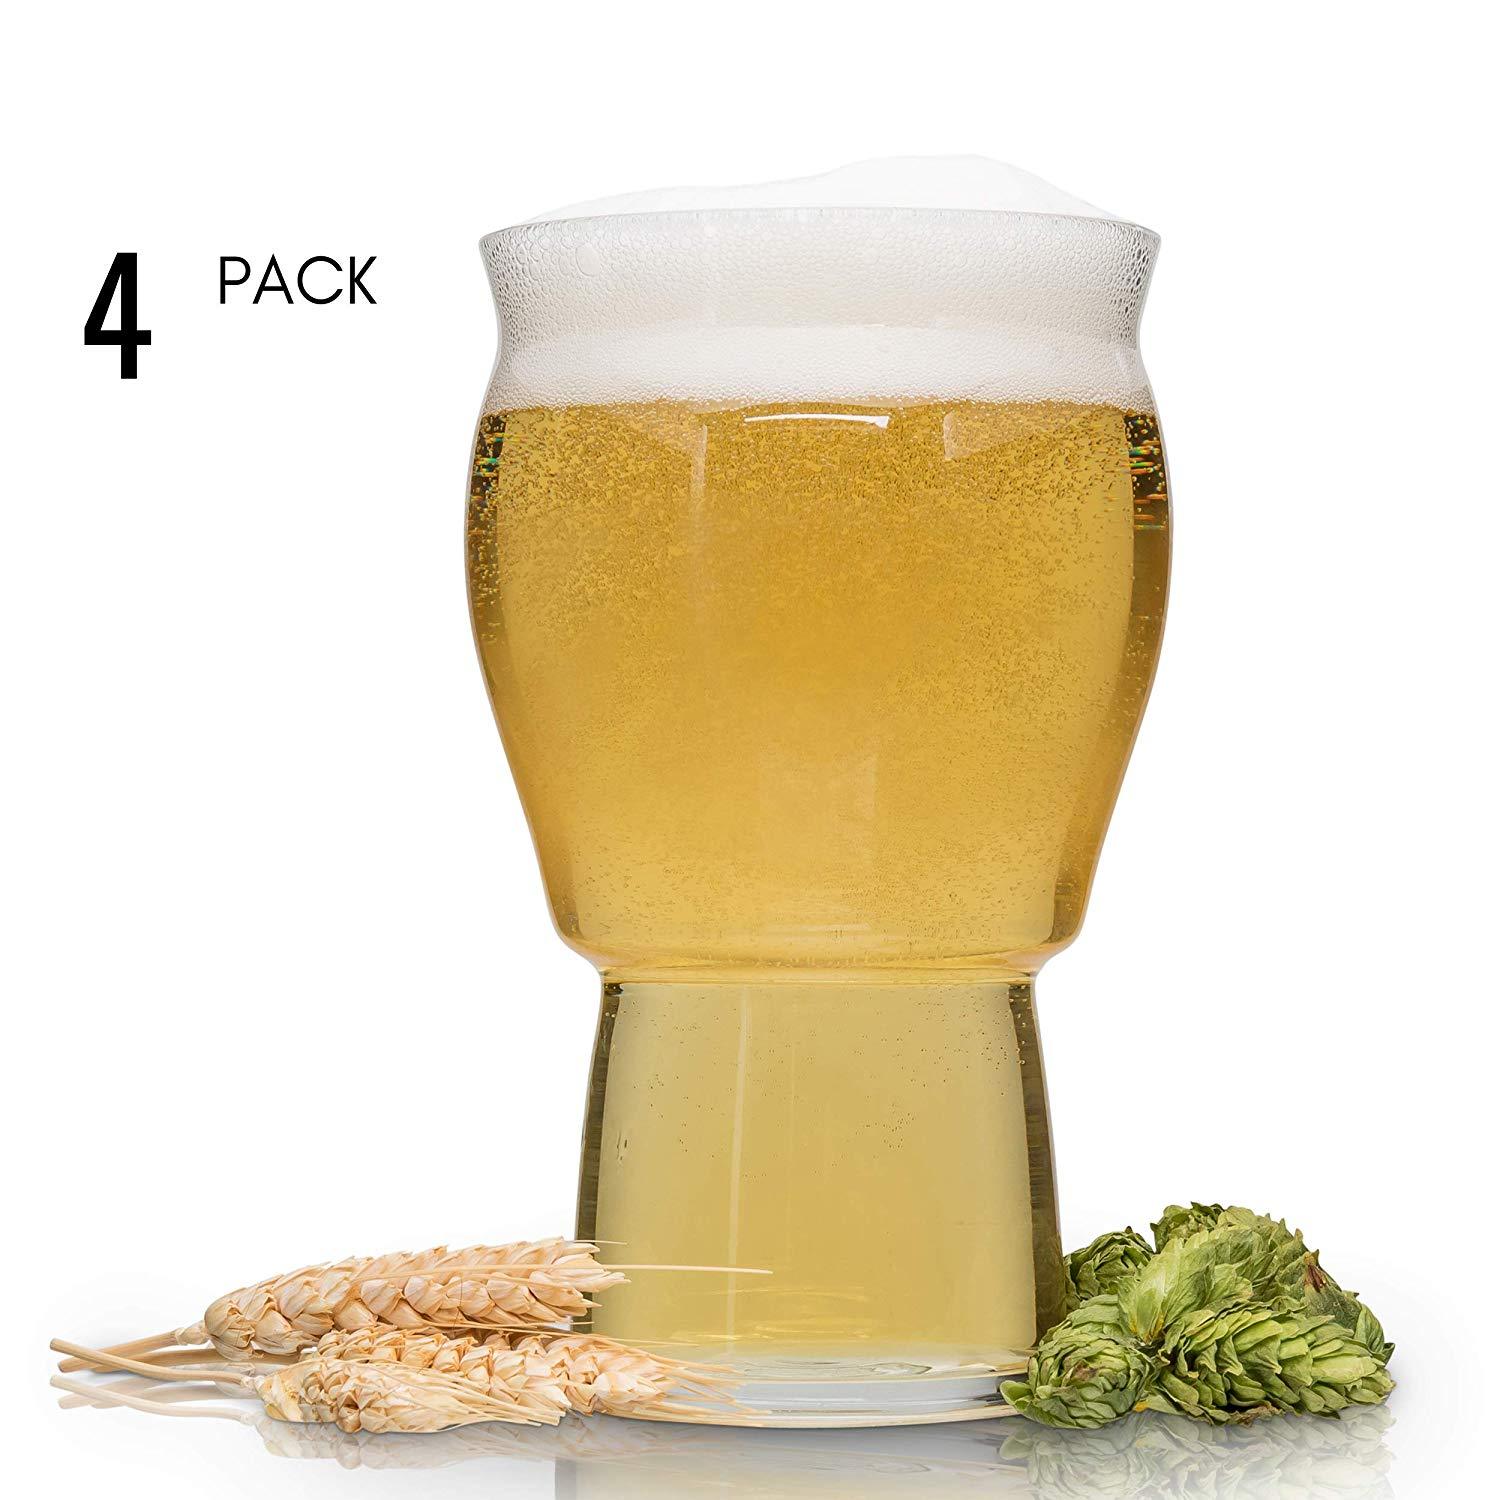 Muffin Top Nucleated Beer Glasses - Pint Glass - Cider, Soda, Tea (Muffin Top Clear 4-pack) Accessories Brewing America 